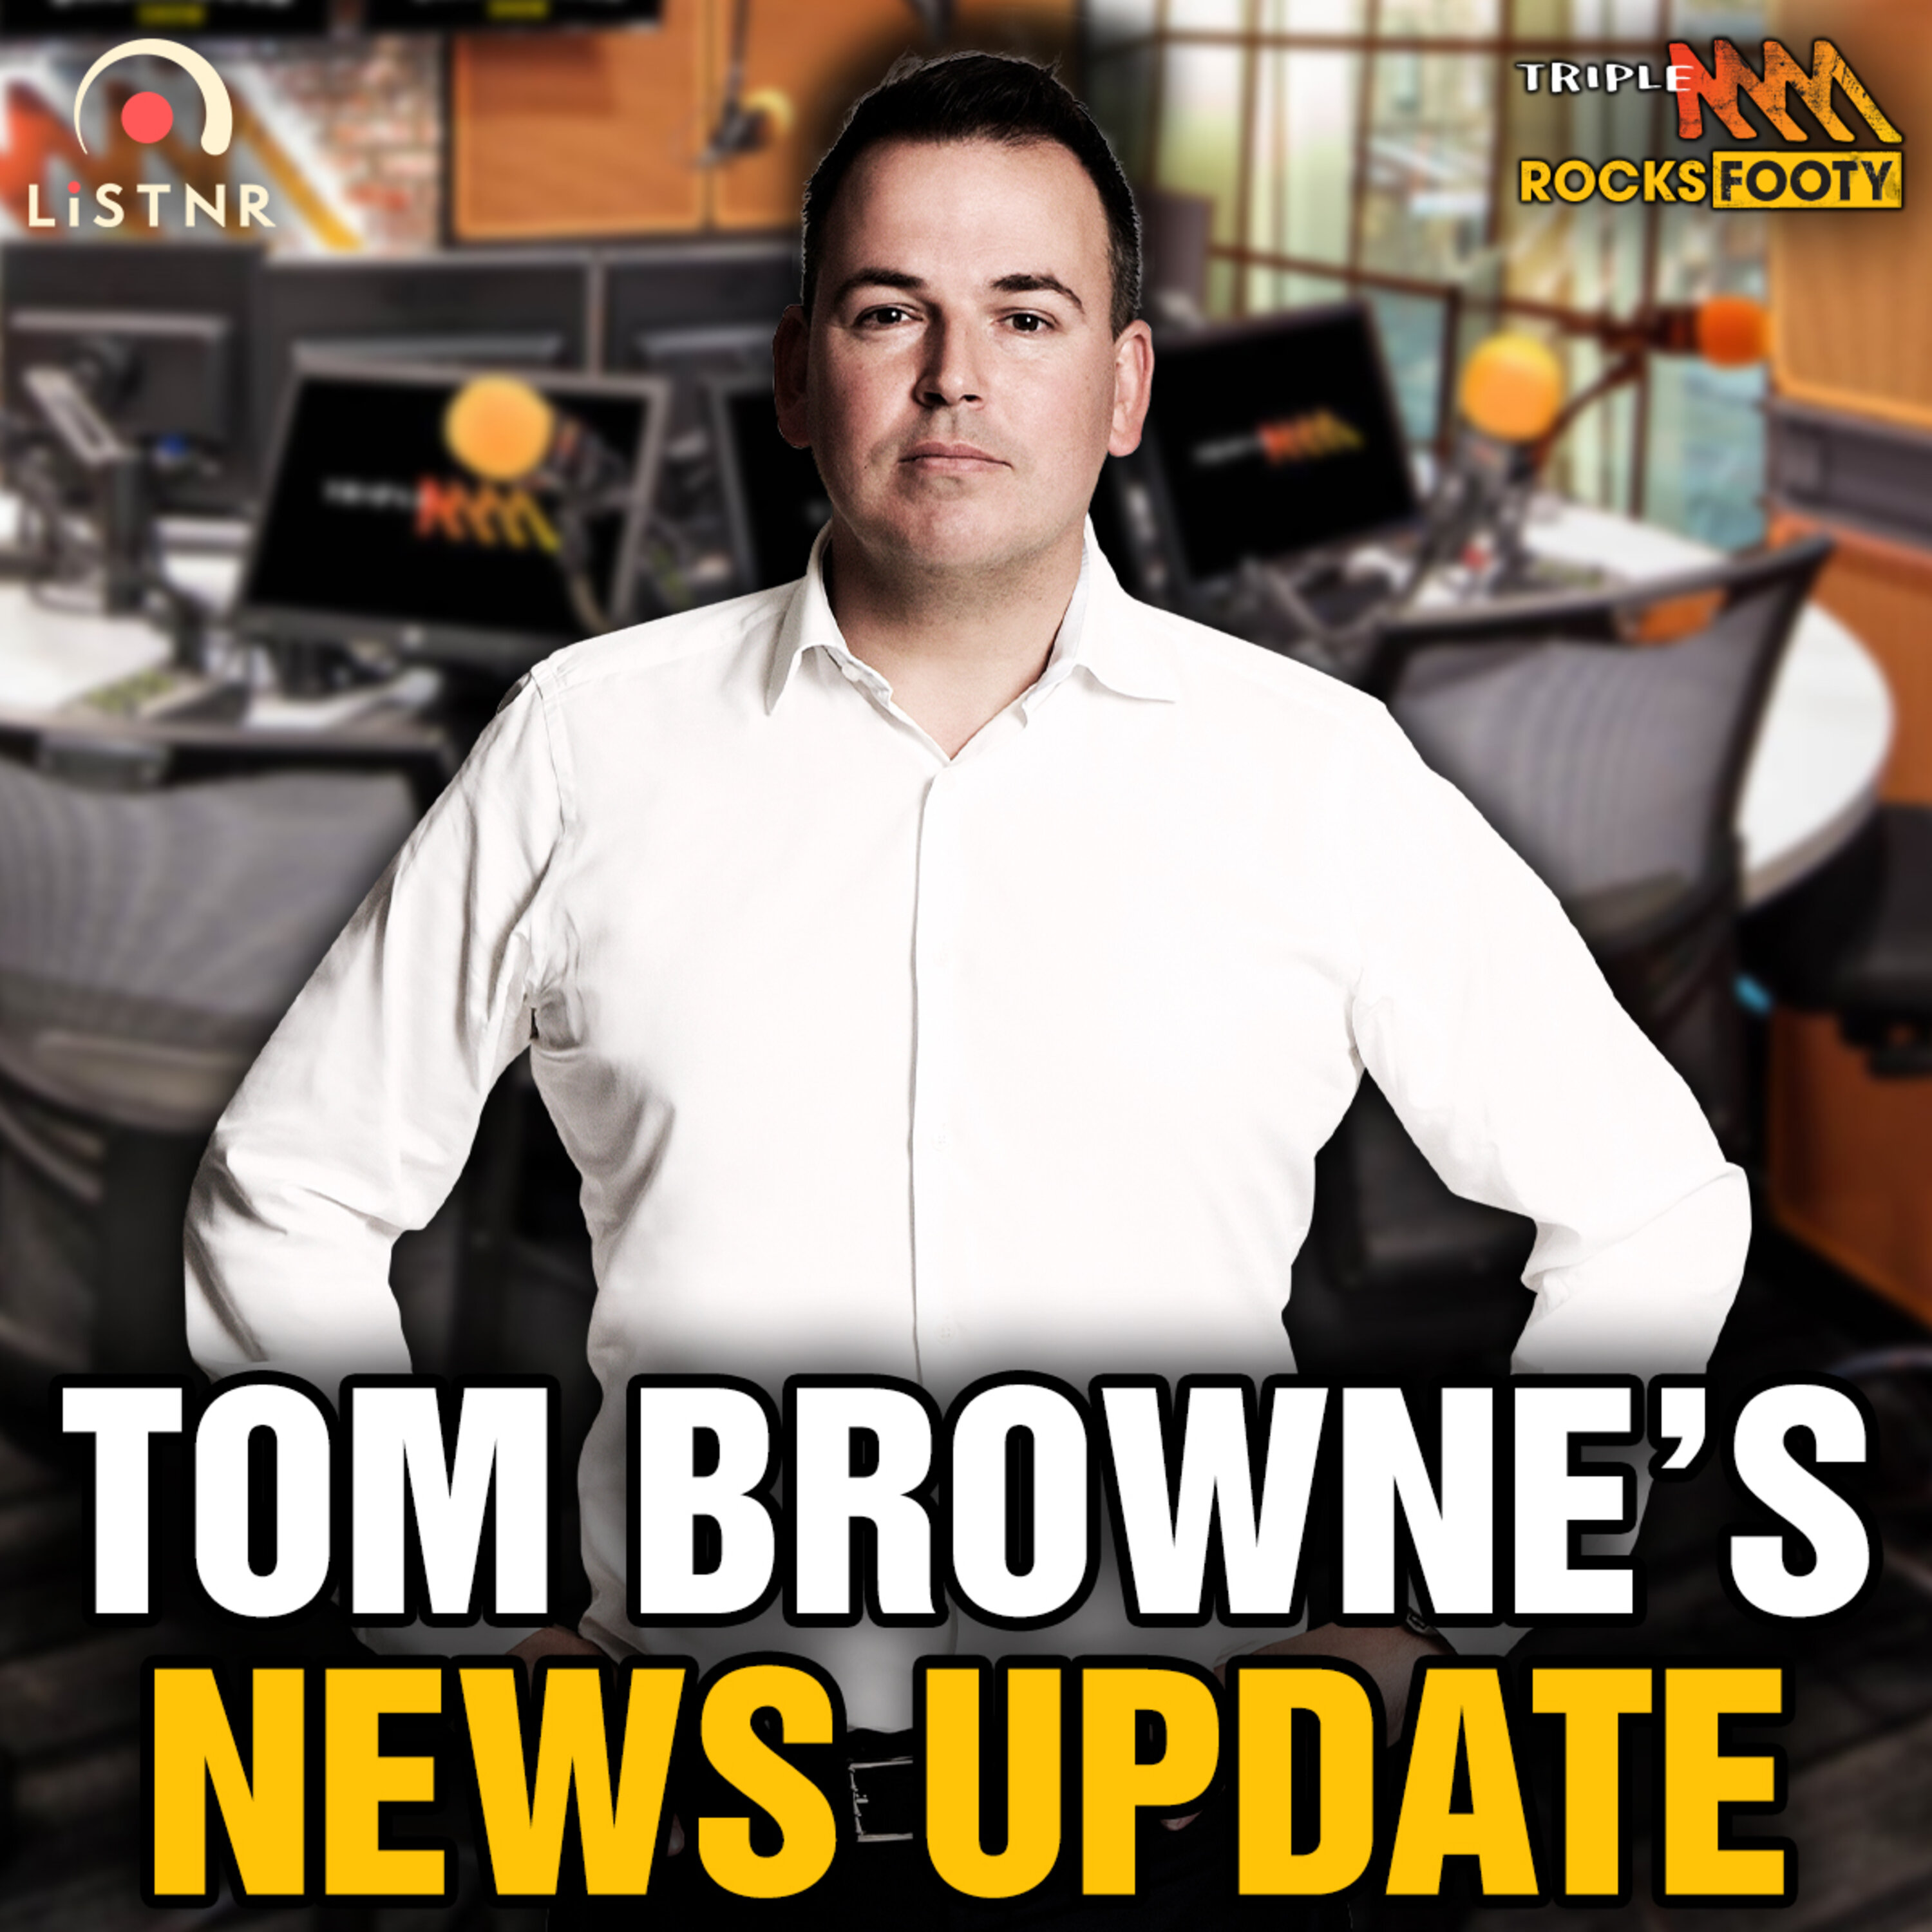 Tom Browne's News | Jack Crisp video update, will we find out who replaces Gil before Gather Round, Lions v Pies preview